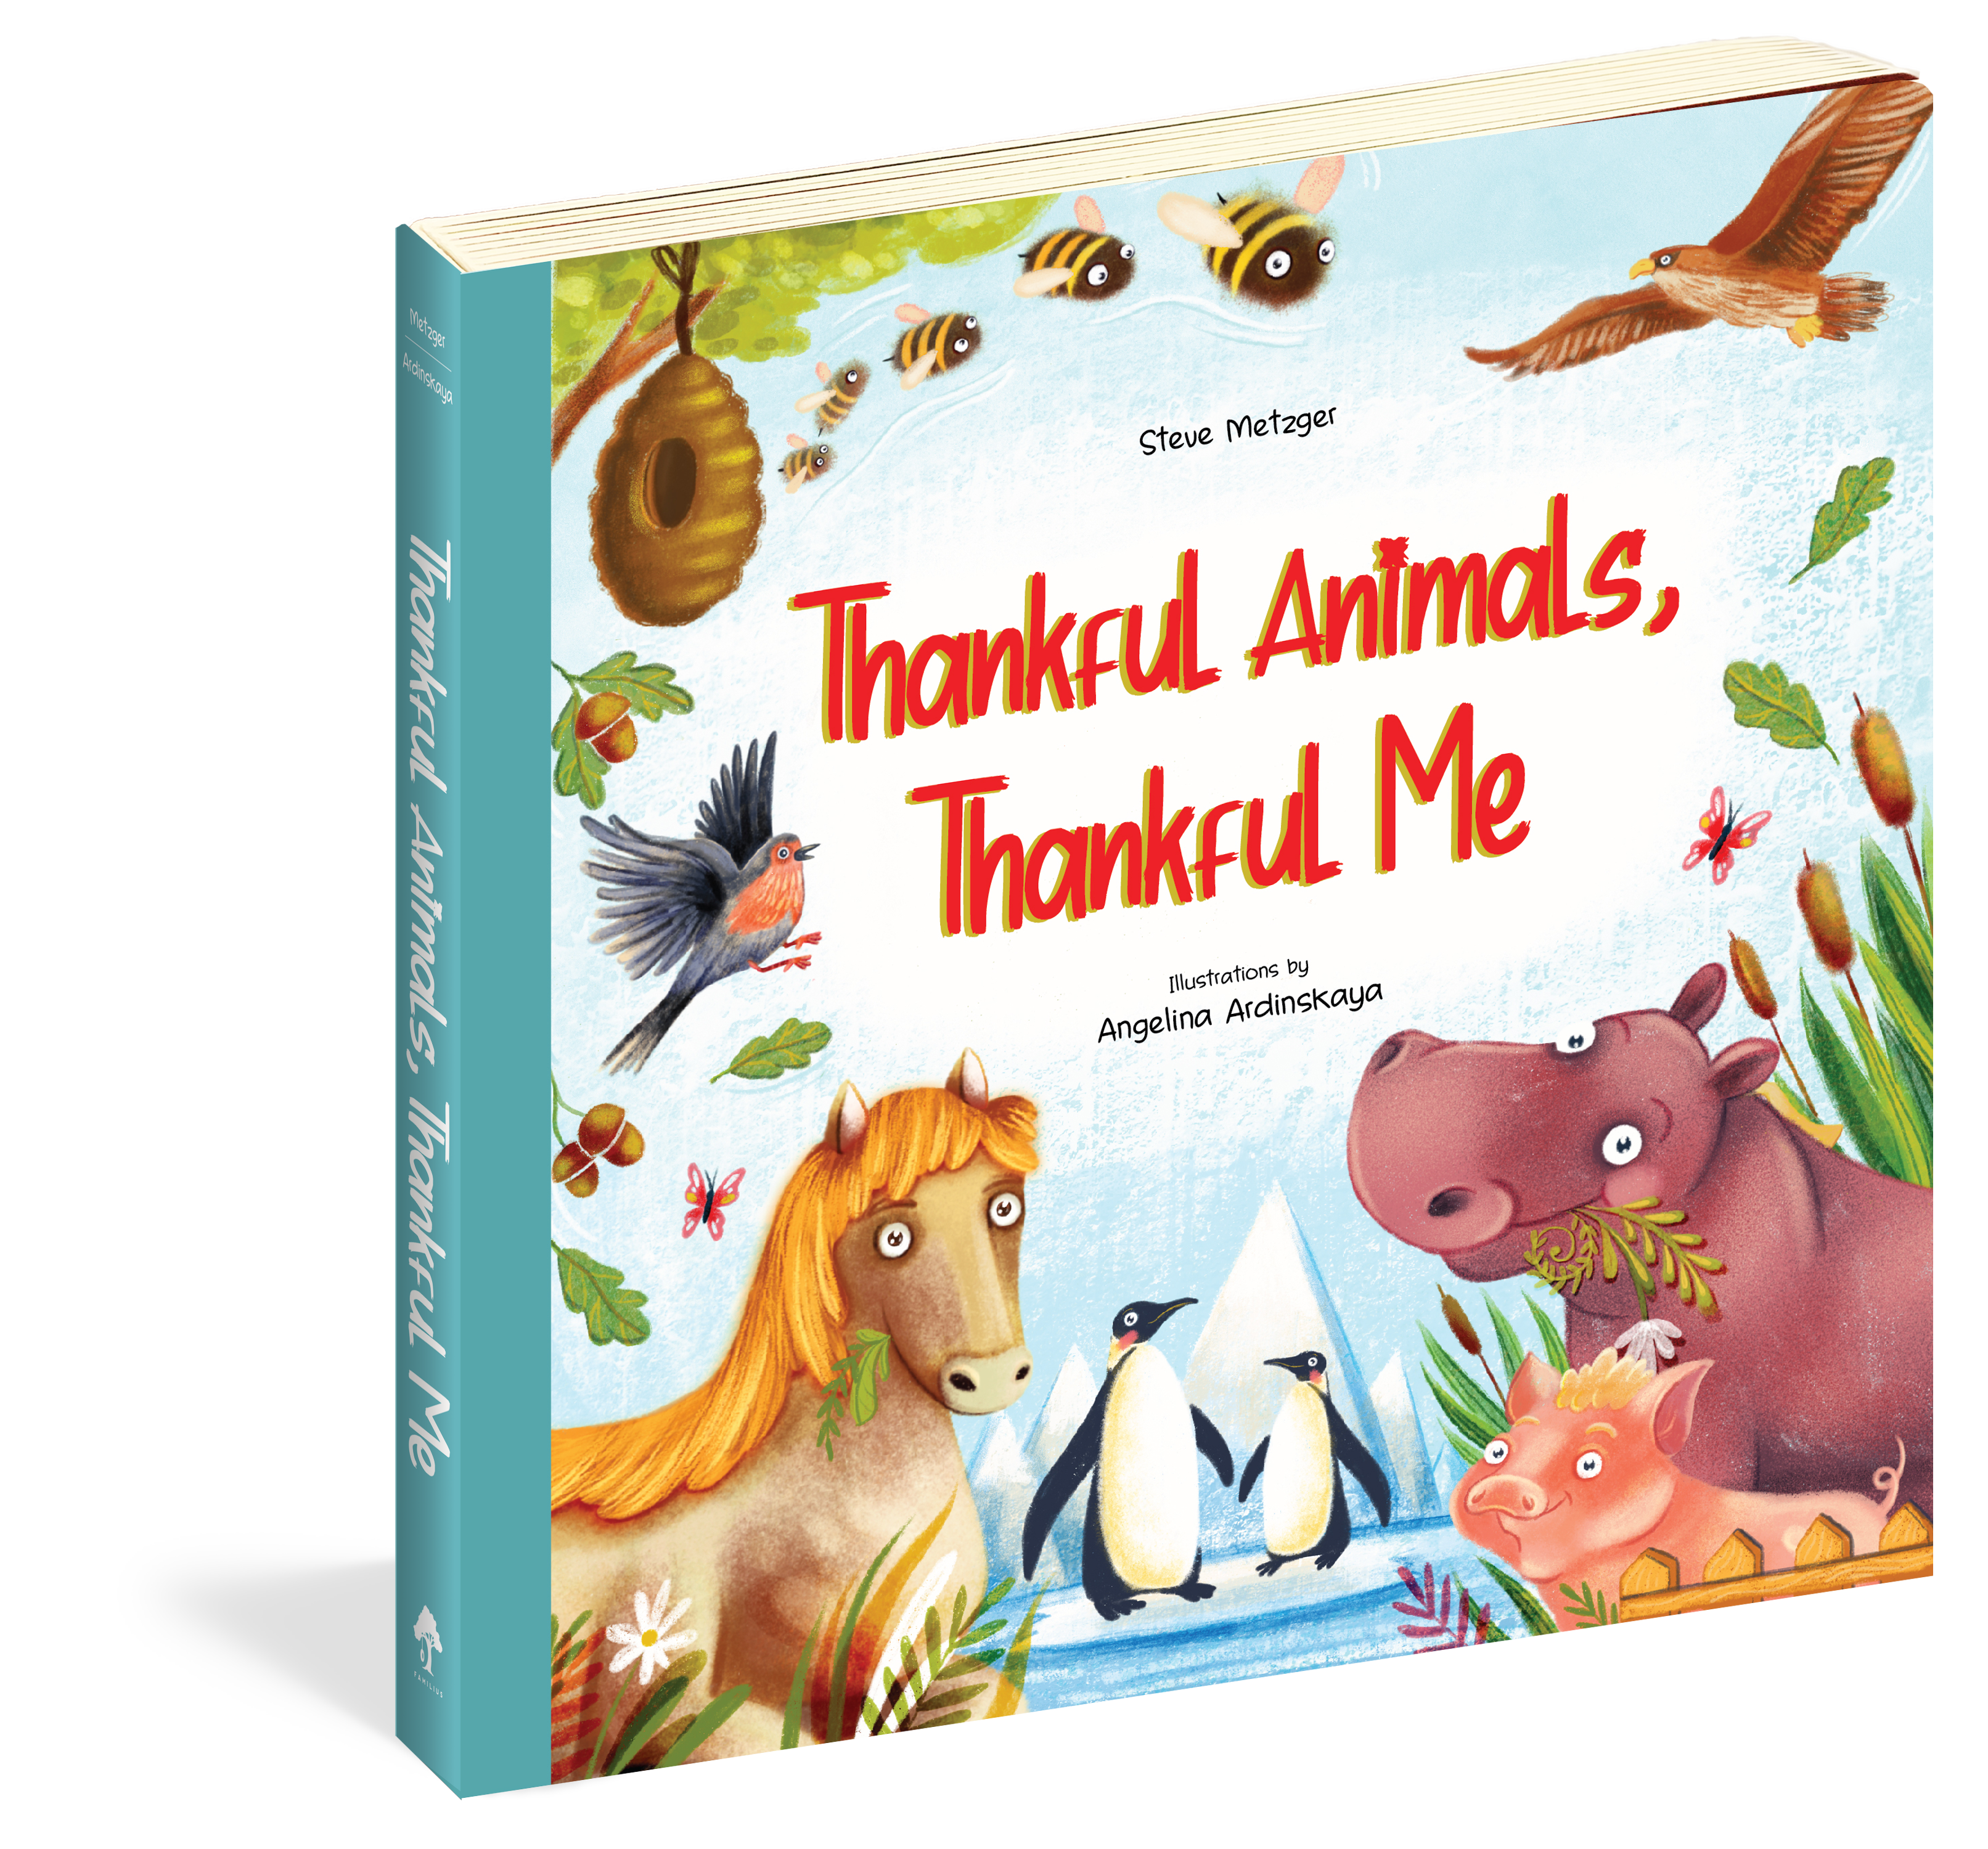 The cover of the board book Thankful Animals, Thankful Me.